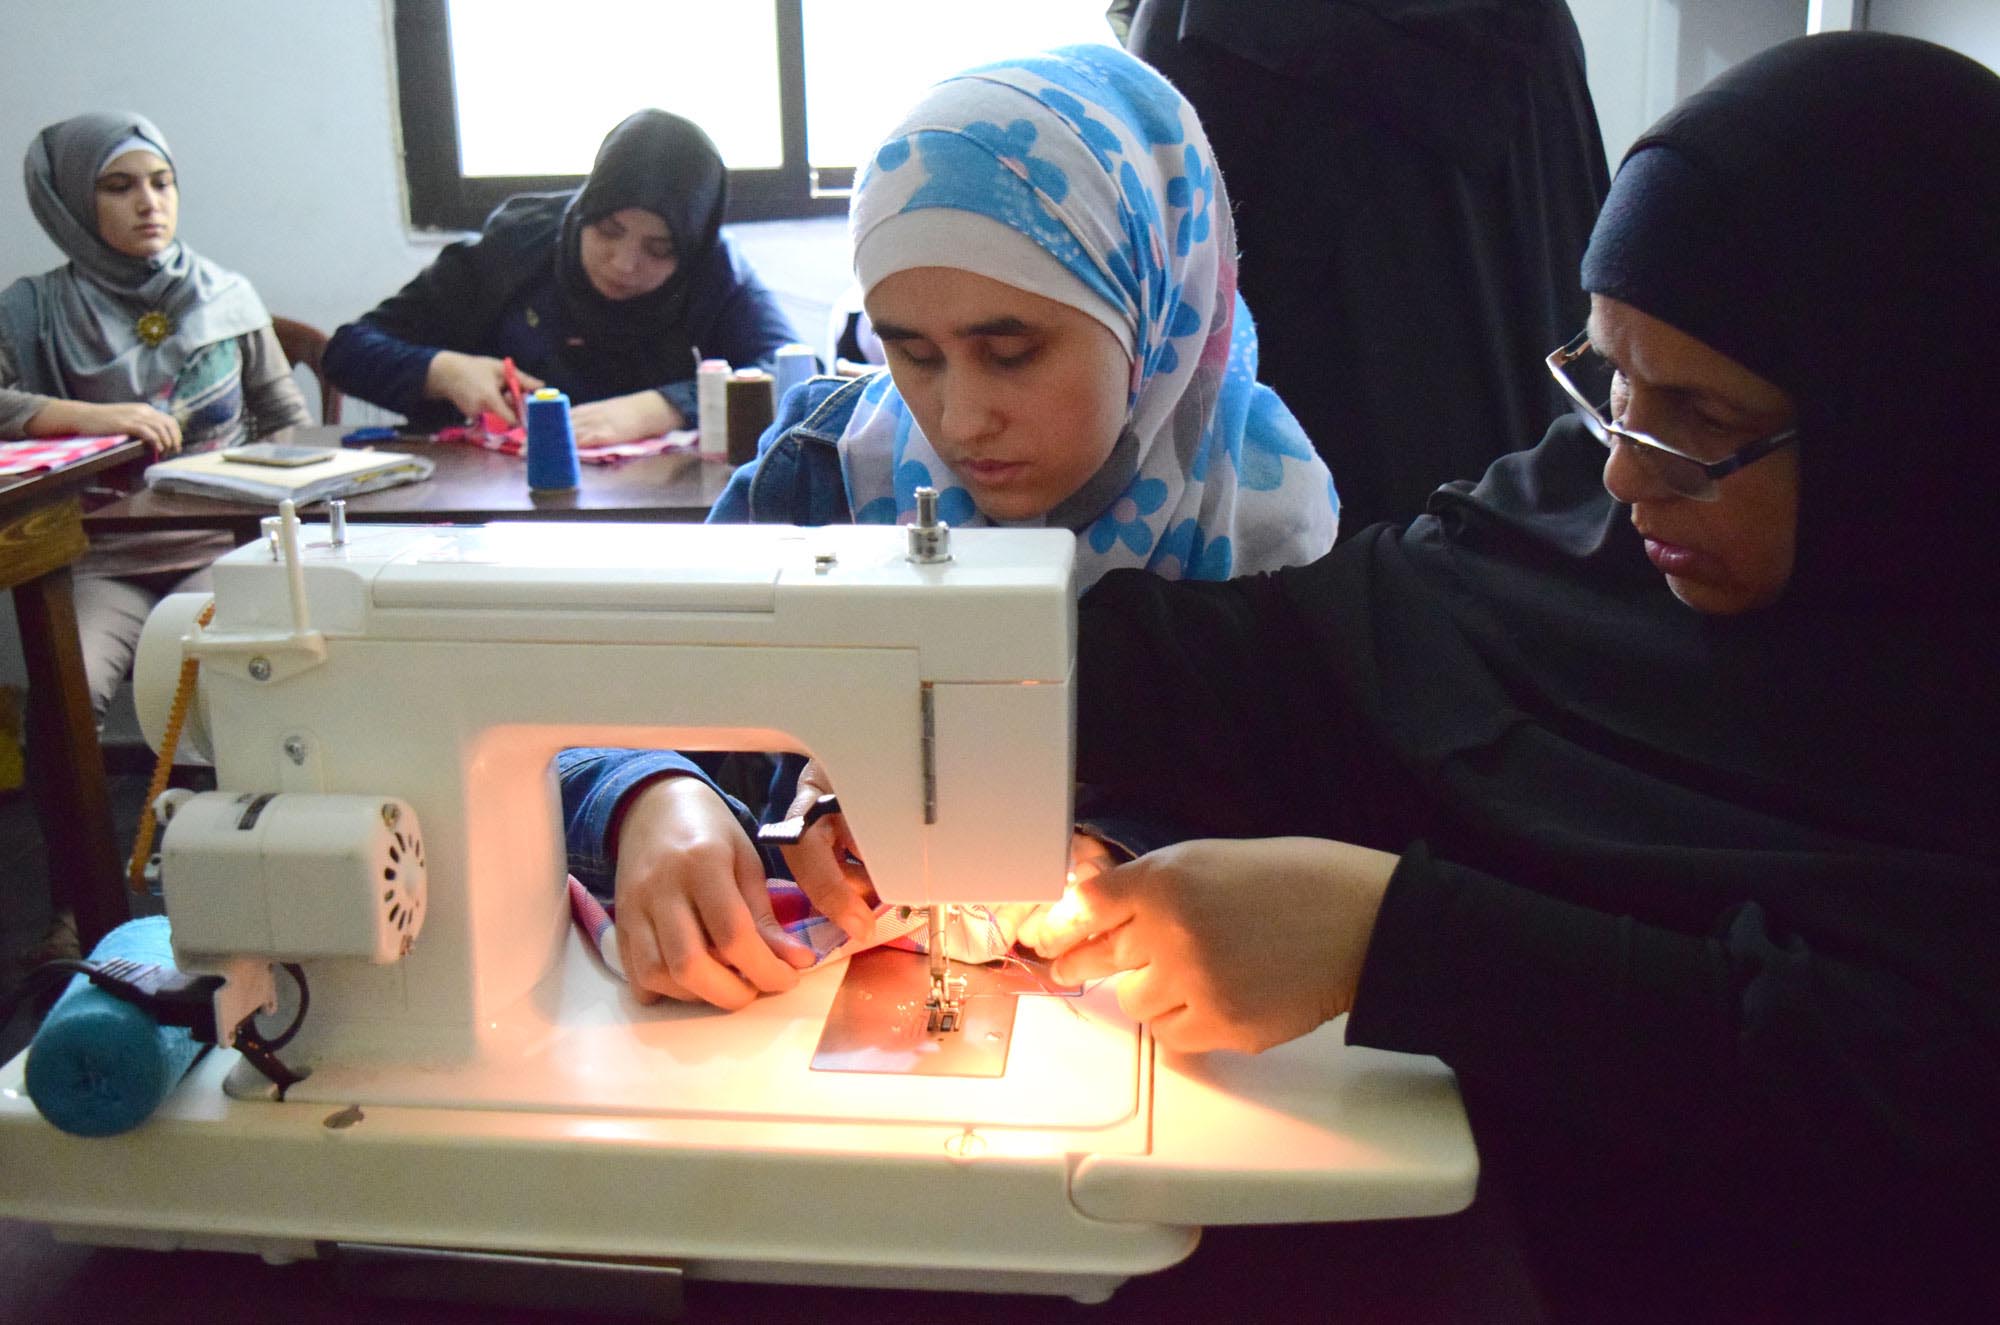 Through Syrian refugee education classes, Salma finds safety and comfort in Lebanon.